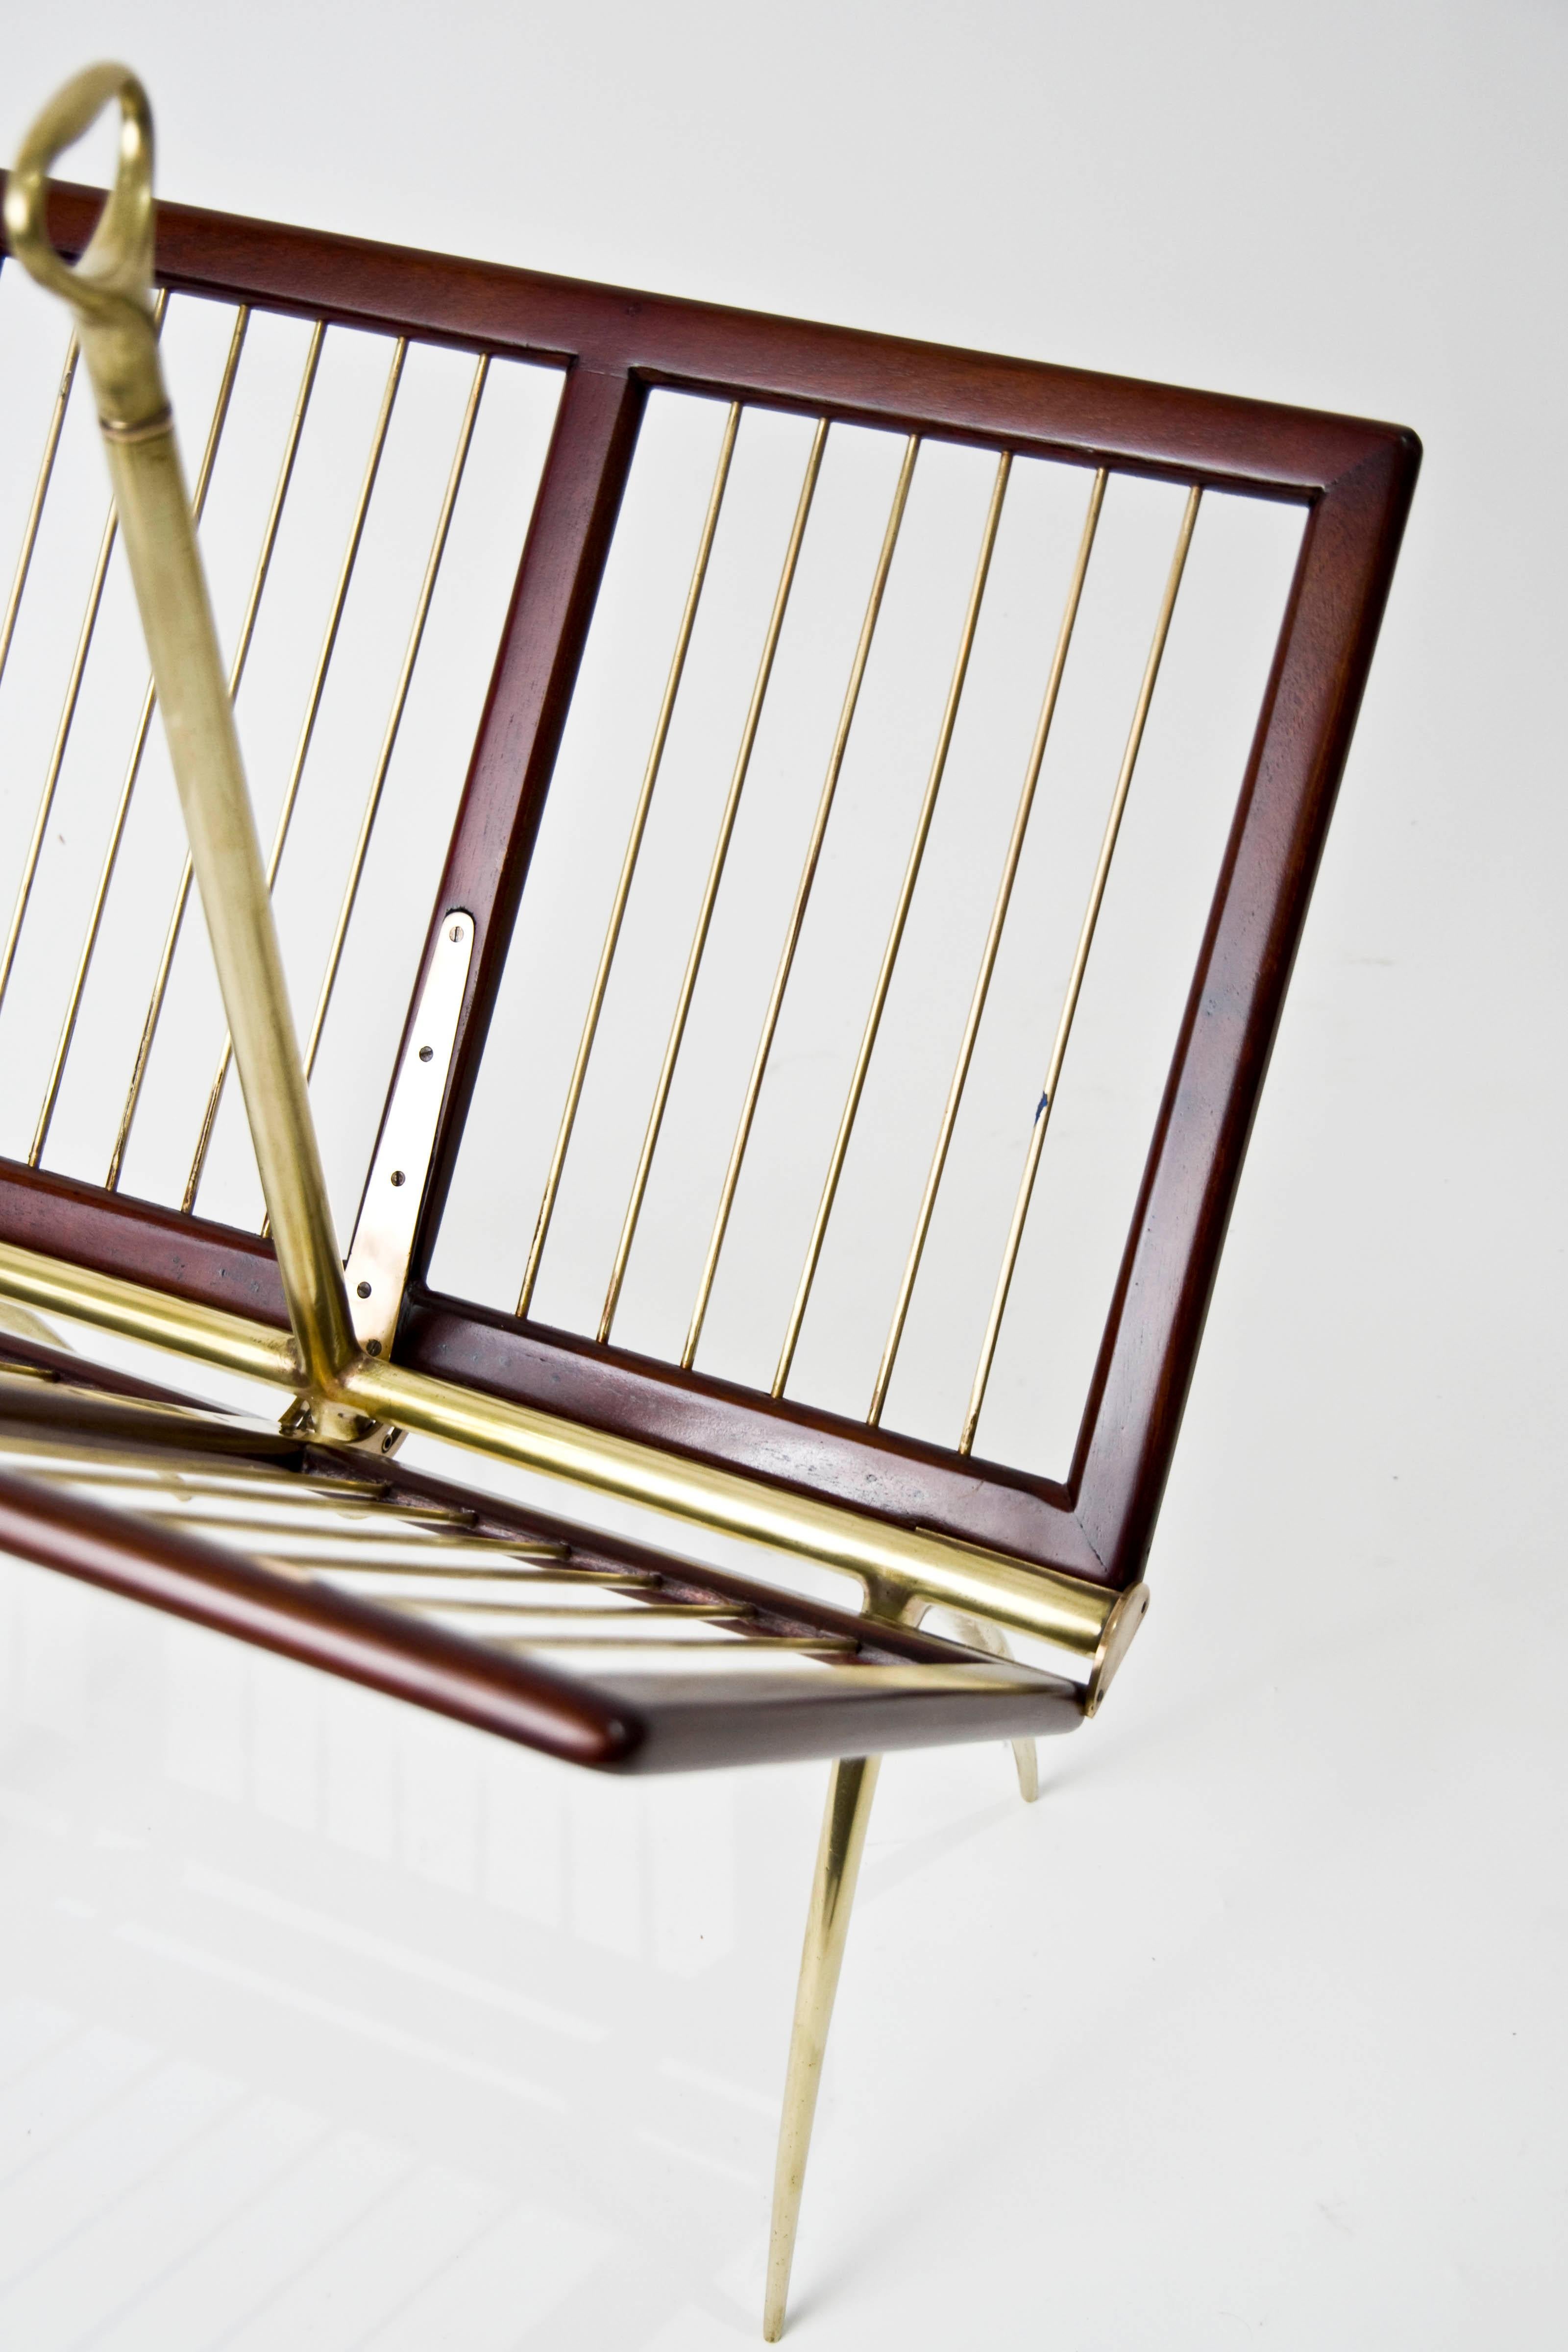 Born Naples in 1972 Italian architect designer Cesare Lacca created modernist furniture and metalwork throughout the 1950s This unusual magazine rack is constructed of mahogany and brass with an open and close mechanism.

Dimensions 26.75” H x